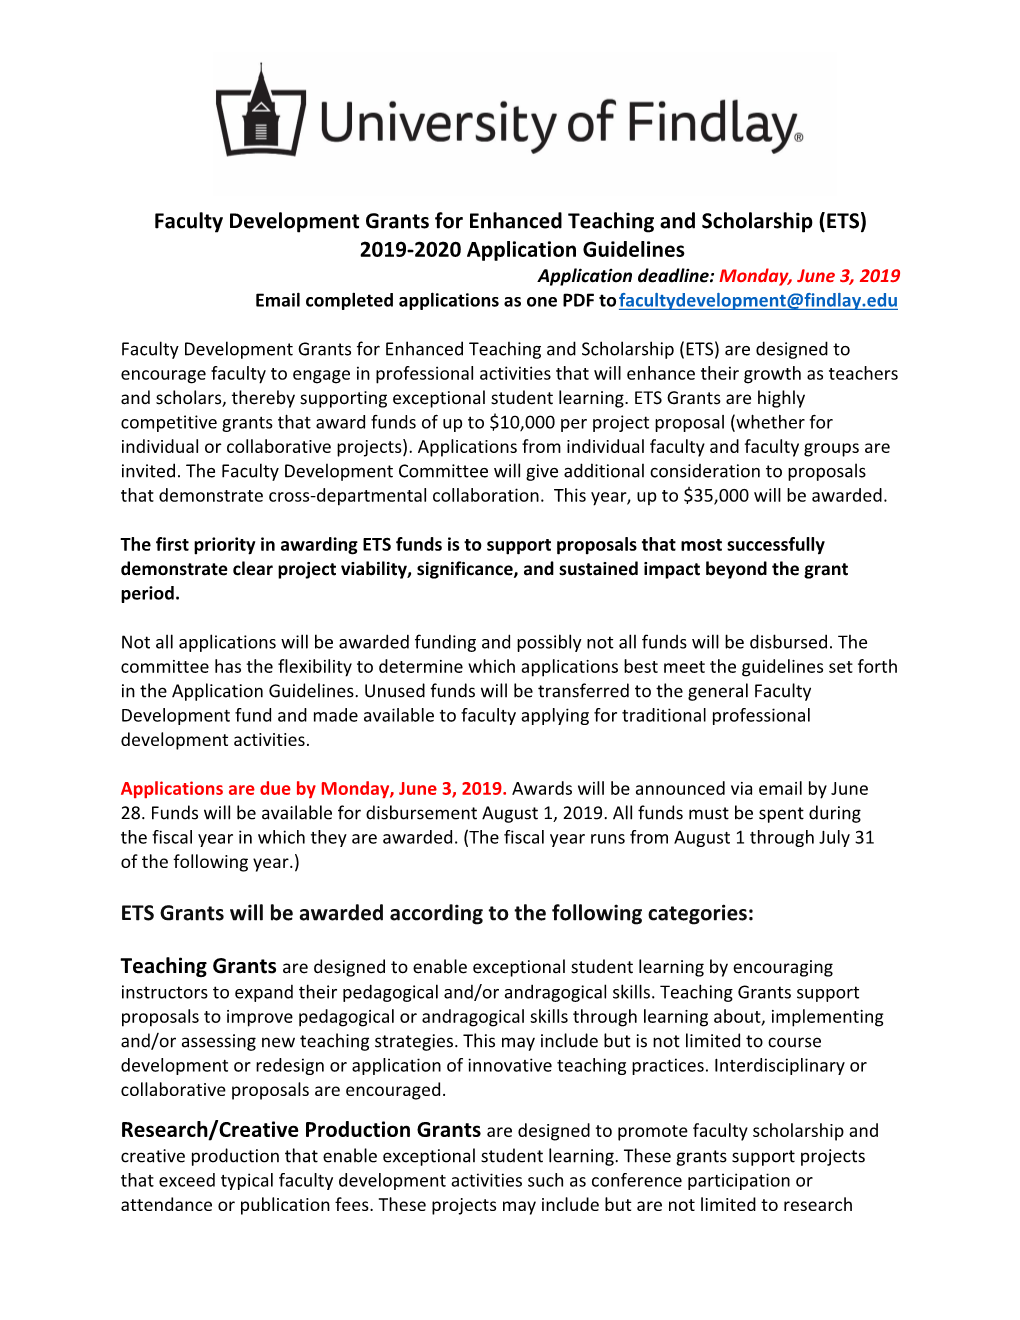 Faculty Development Grants for Enhanced Teaching and Scholarship (ETS) 2019-2020 Application Guidelines ETS Grants Will Be Award